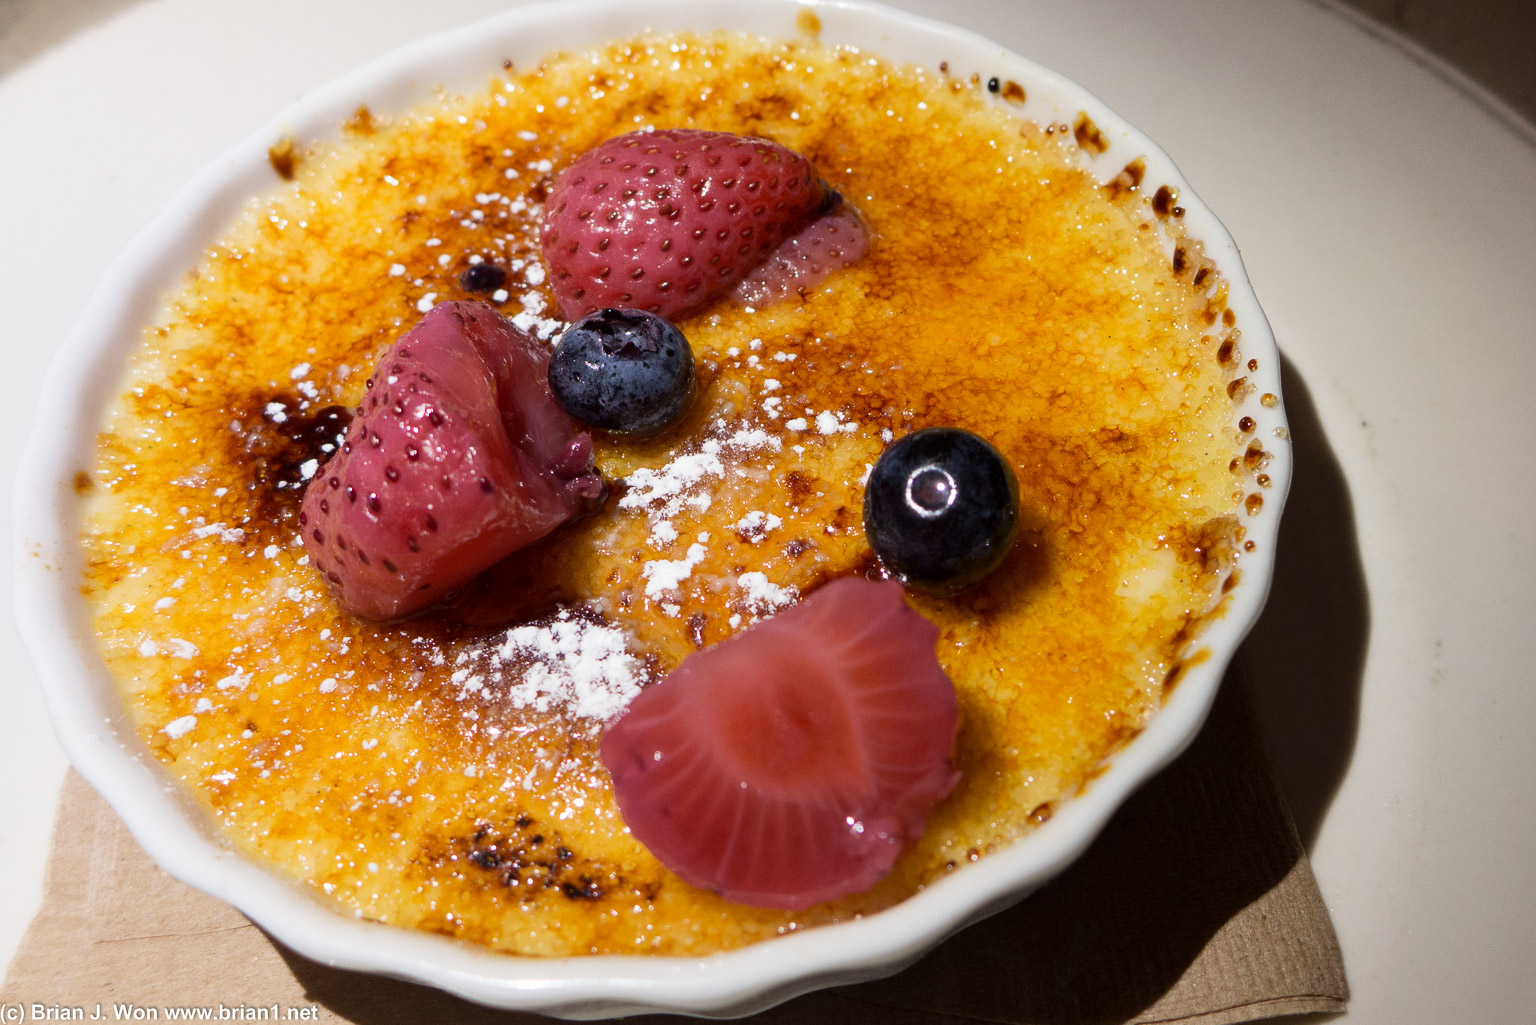 Creme brulee. Tasty but way too thick on the surface.